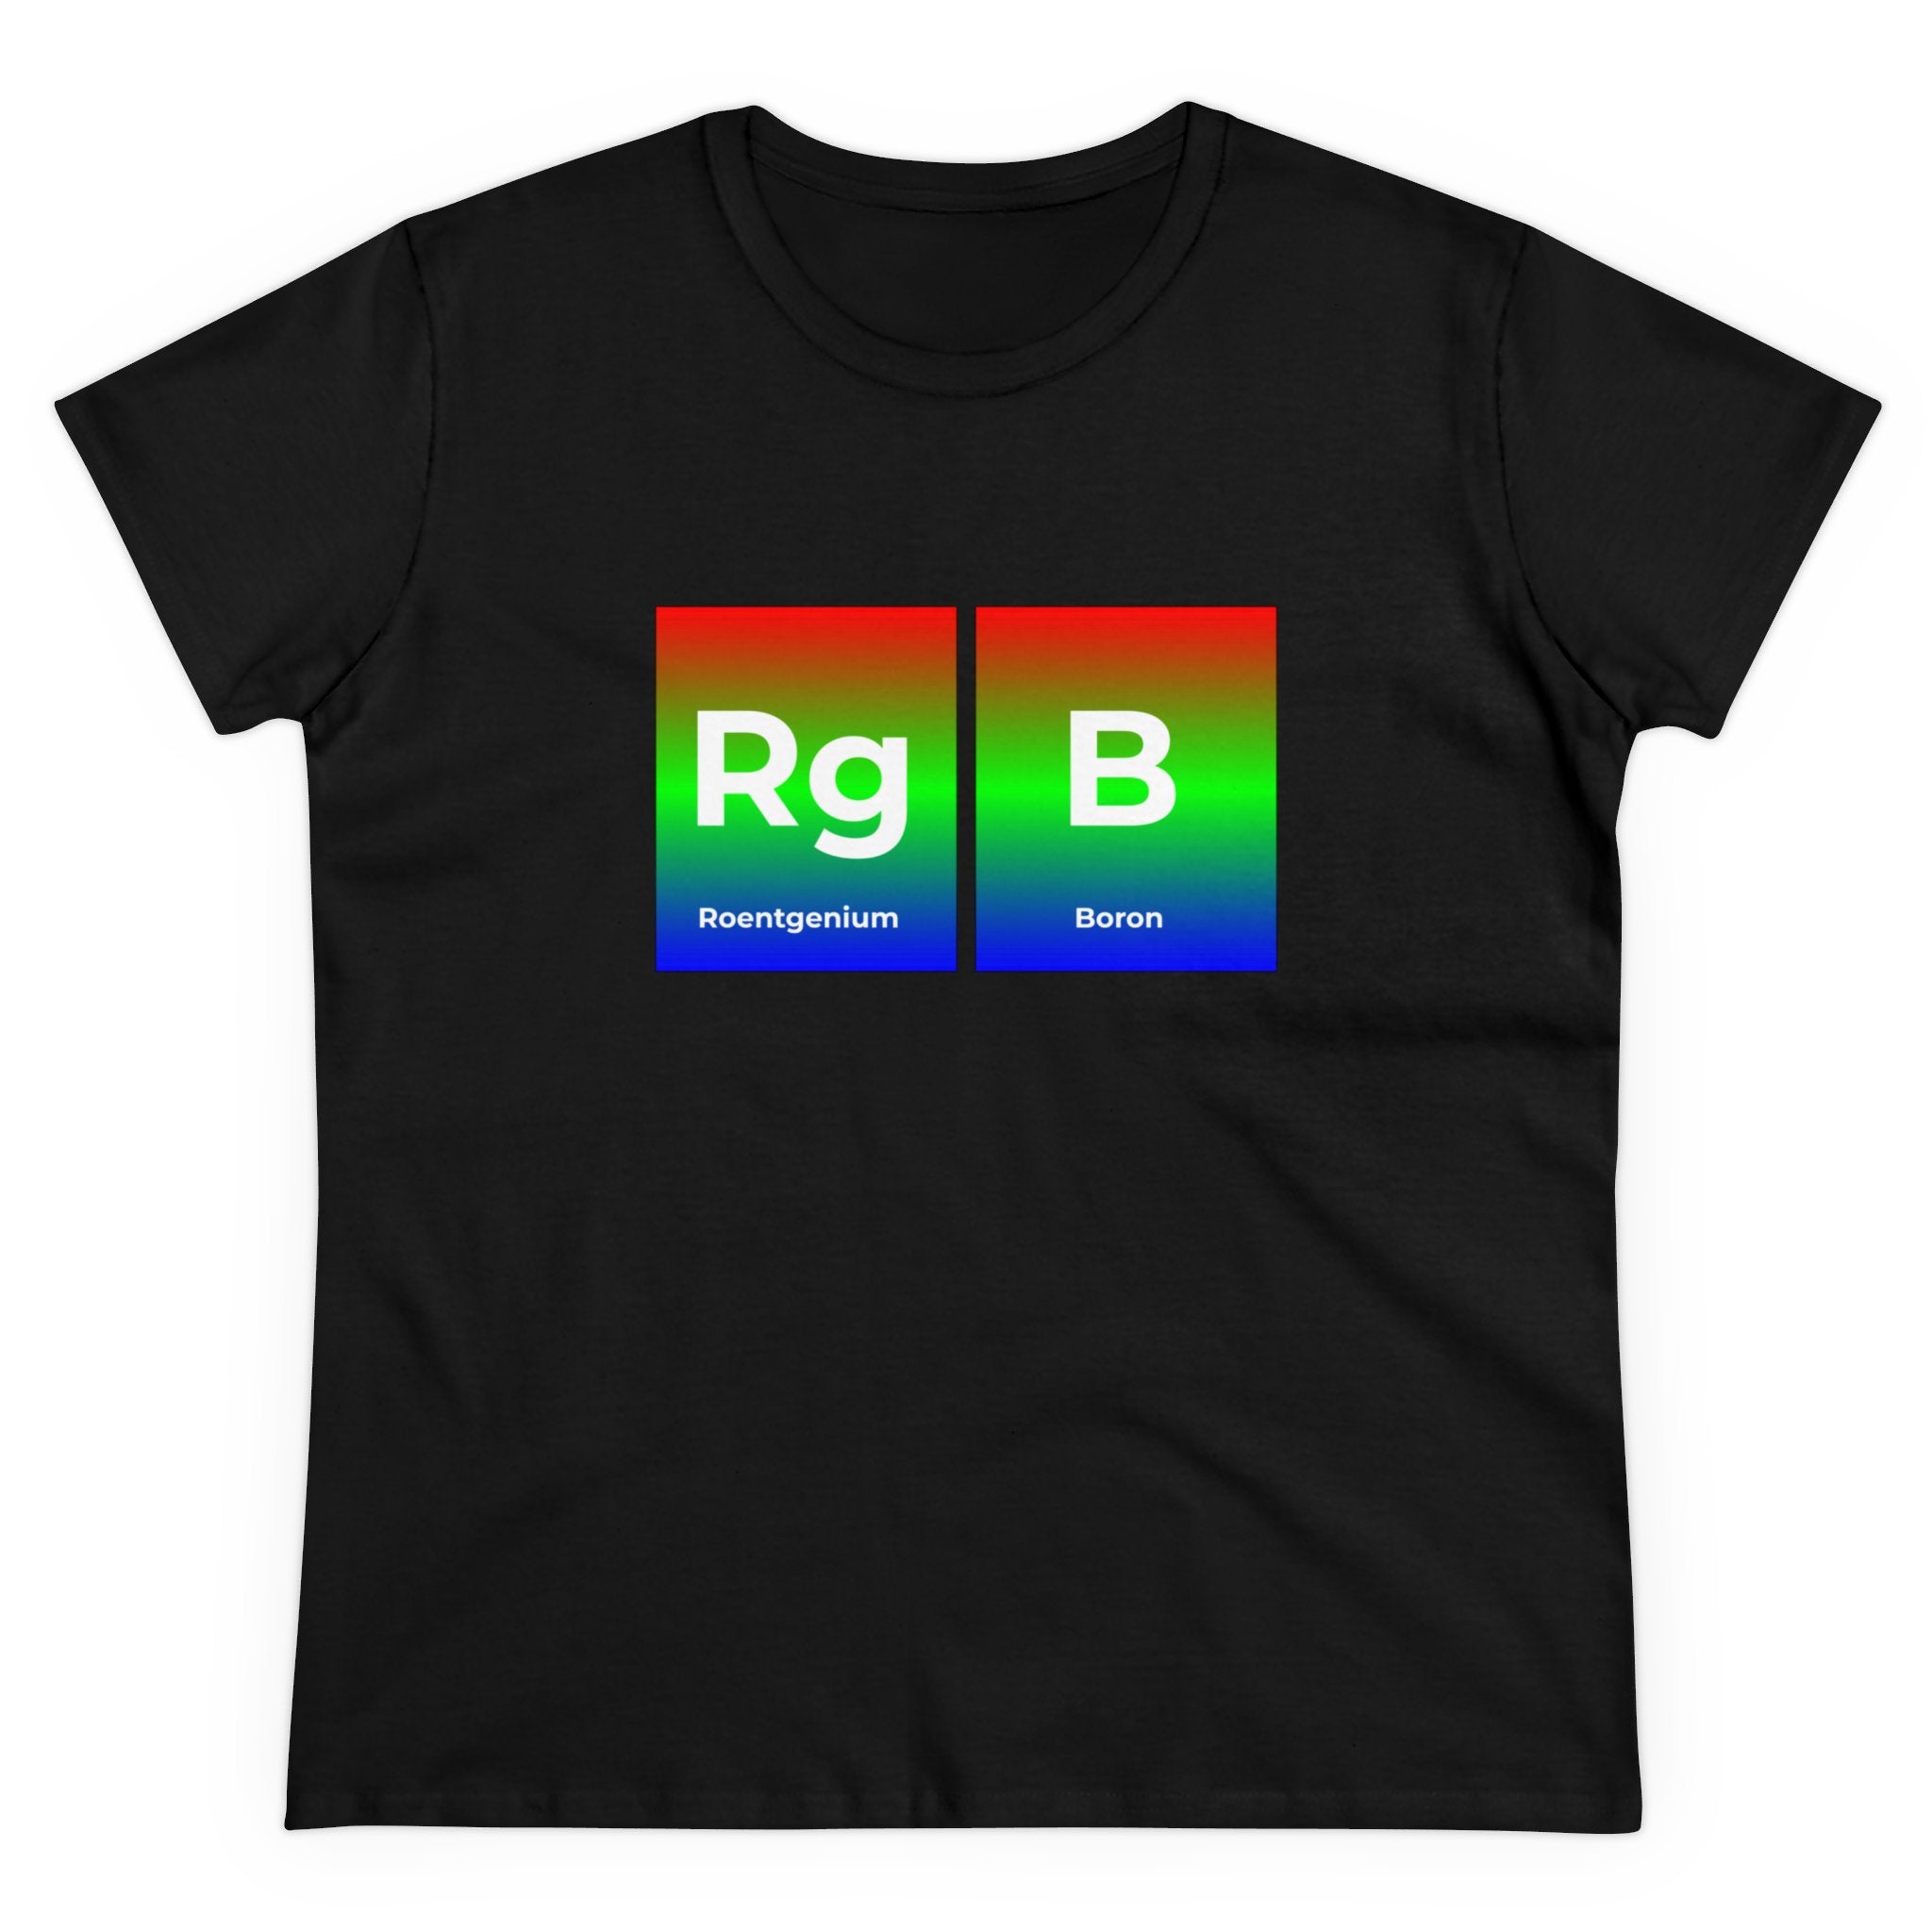 A vibrant fashion statement, the RG-B - Women's Tee features a black cotton tee with a color gradient design and elements "Rg" labeled as Roentgenium and "B" labeled as Boron, resembling a periodic table format. Perfect for women's tee collections, it combines scientific flair with everyday wearability.